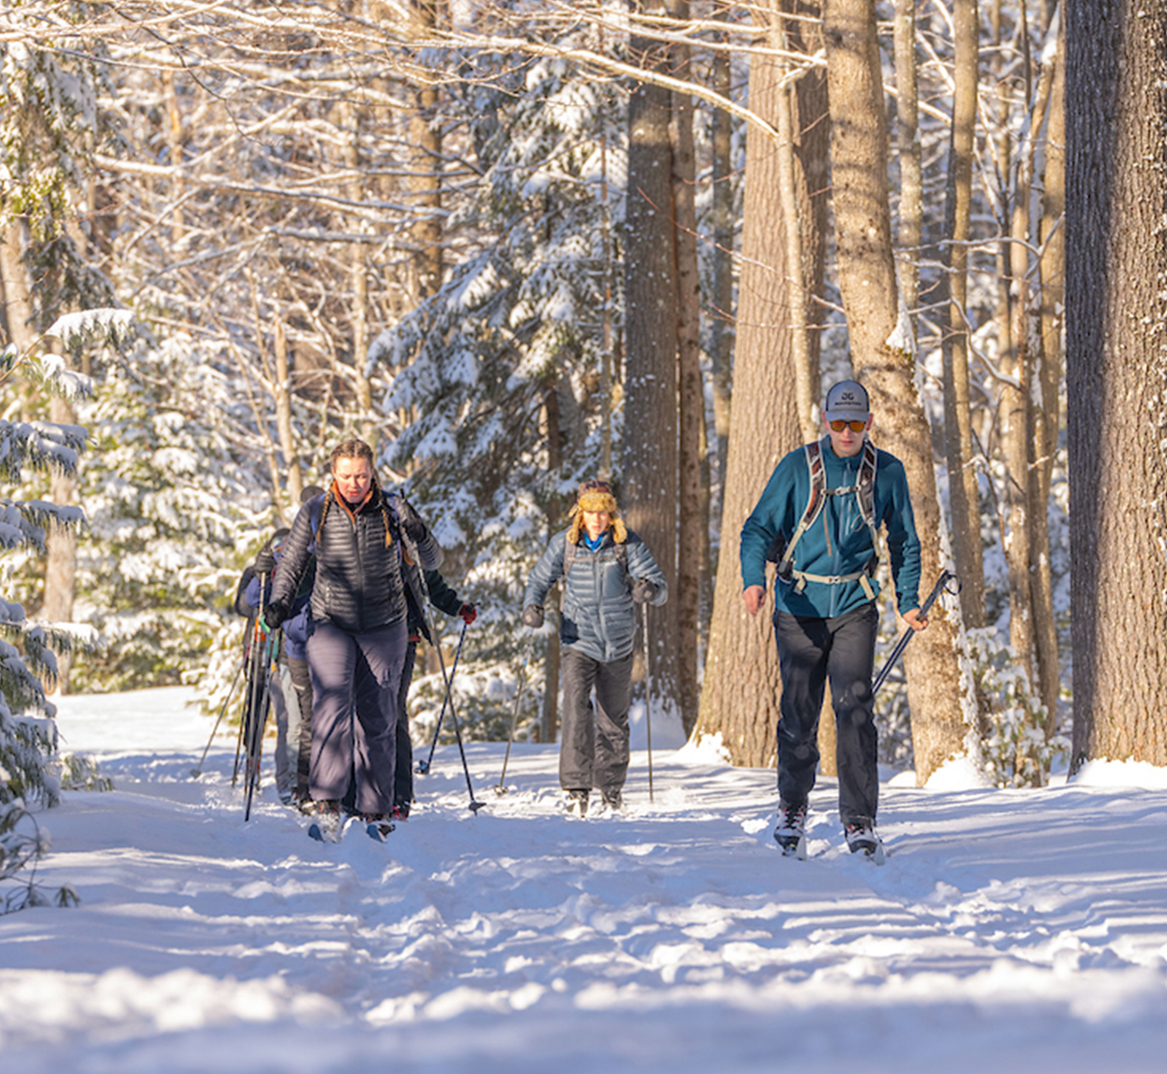 A photo of students snowshoeing